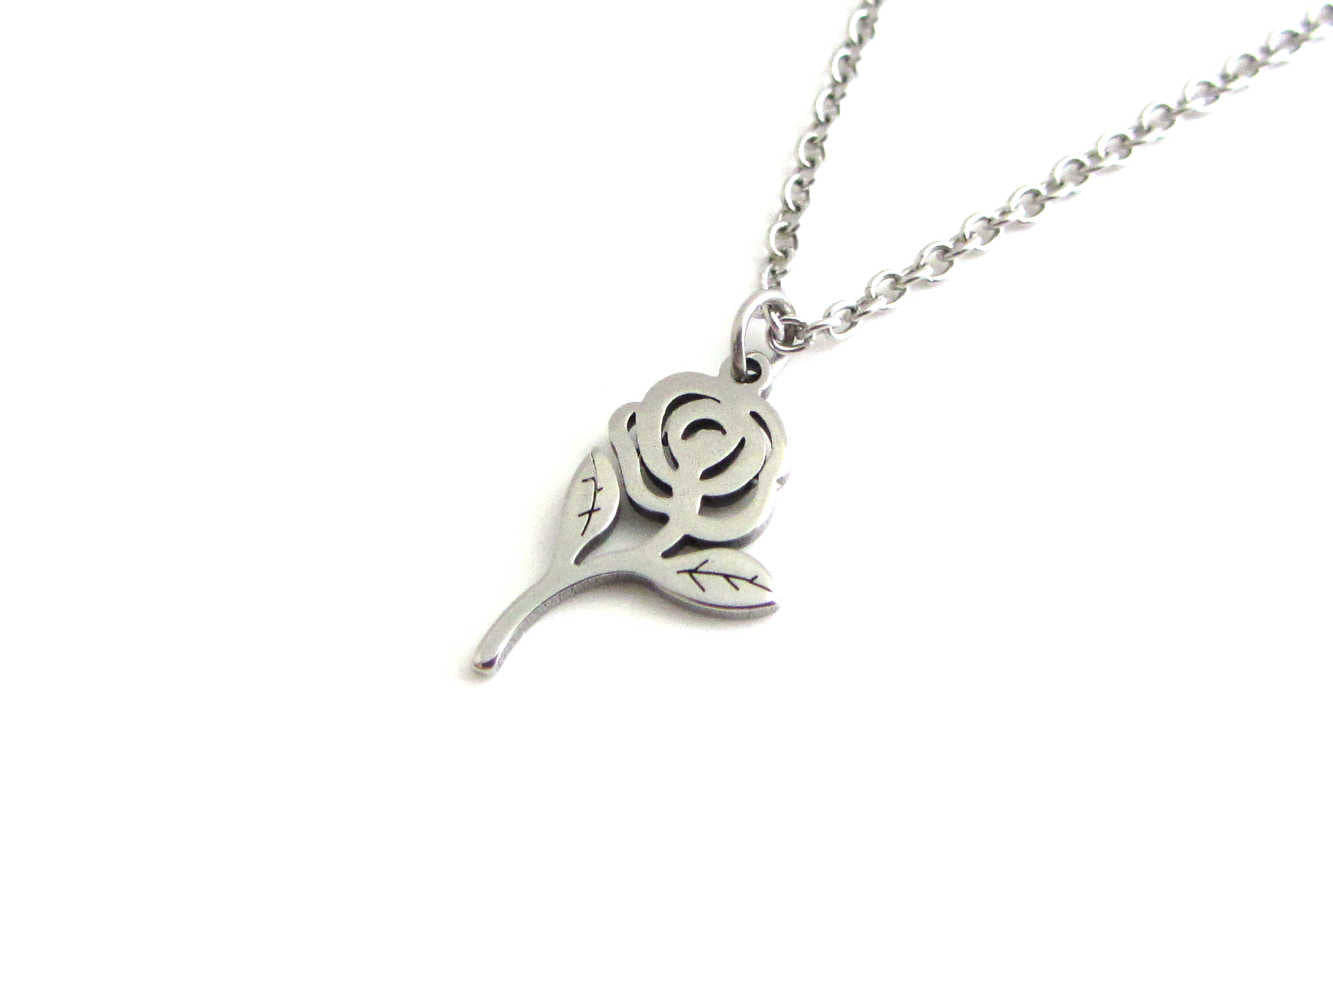 rose flower charm on a stainless steel chain